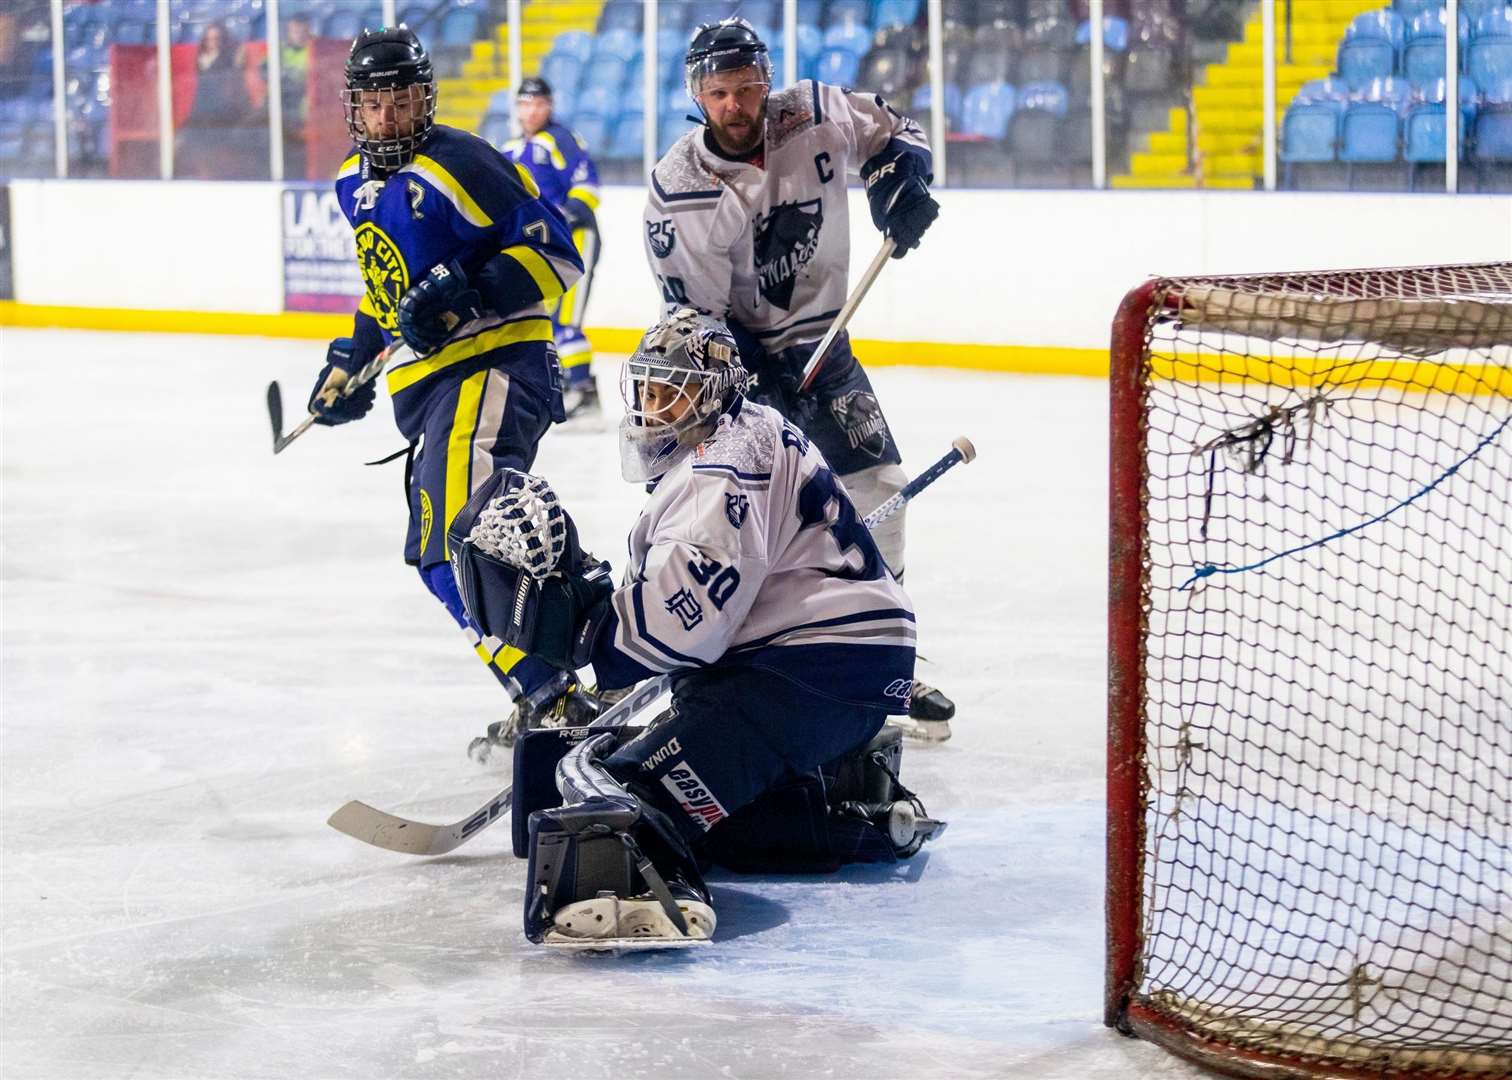 Captain Tom Davis looks on as Owen Rider secures his first senior shutout for Invicta Dynamos Picture: David Trevallion